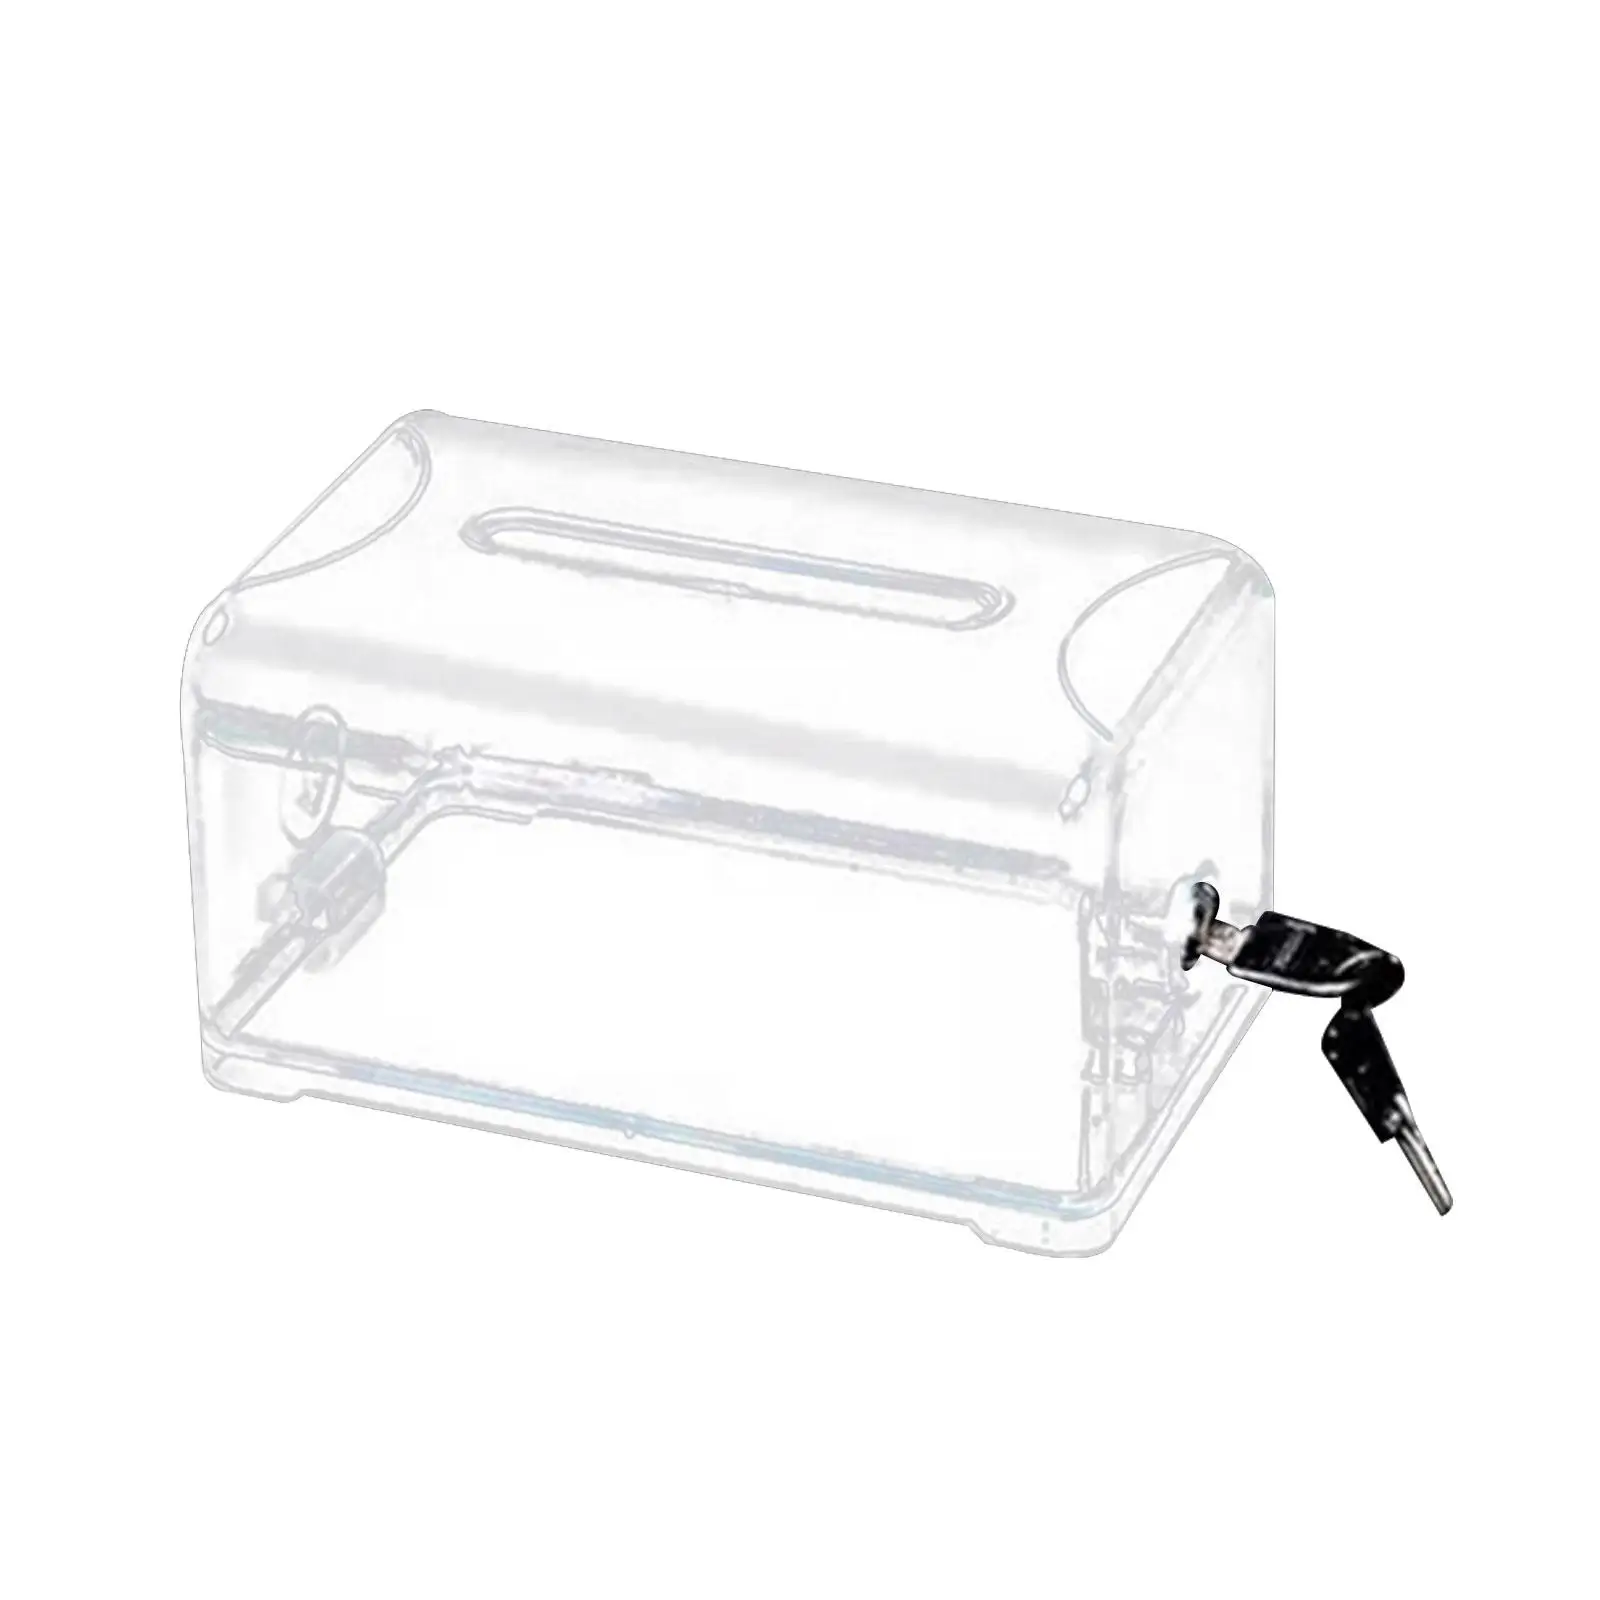 

Clear Voting Box Multifunctional Comment Box Lockable Raffle Ticket Box Acrylic Donation Box for Voting Business